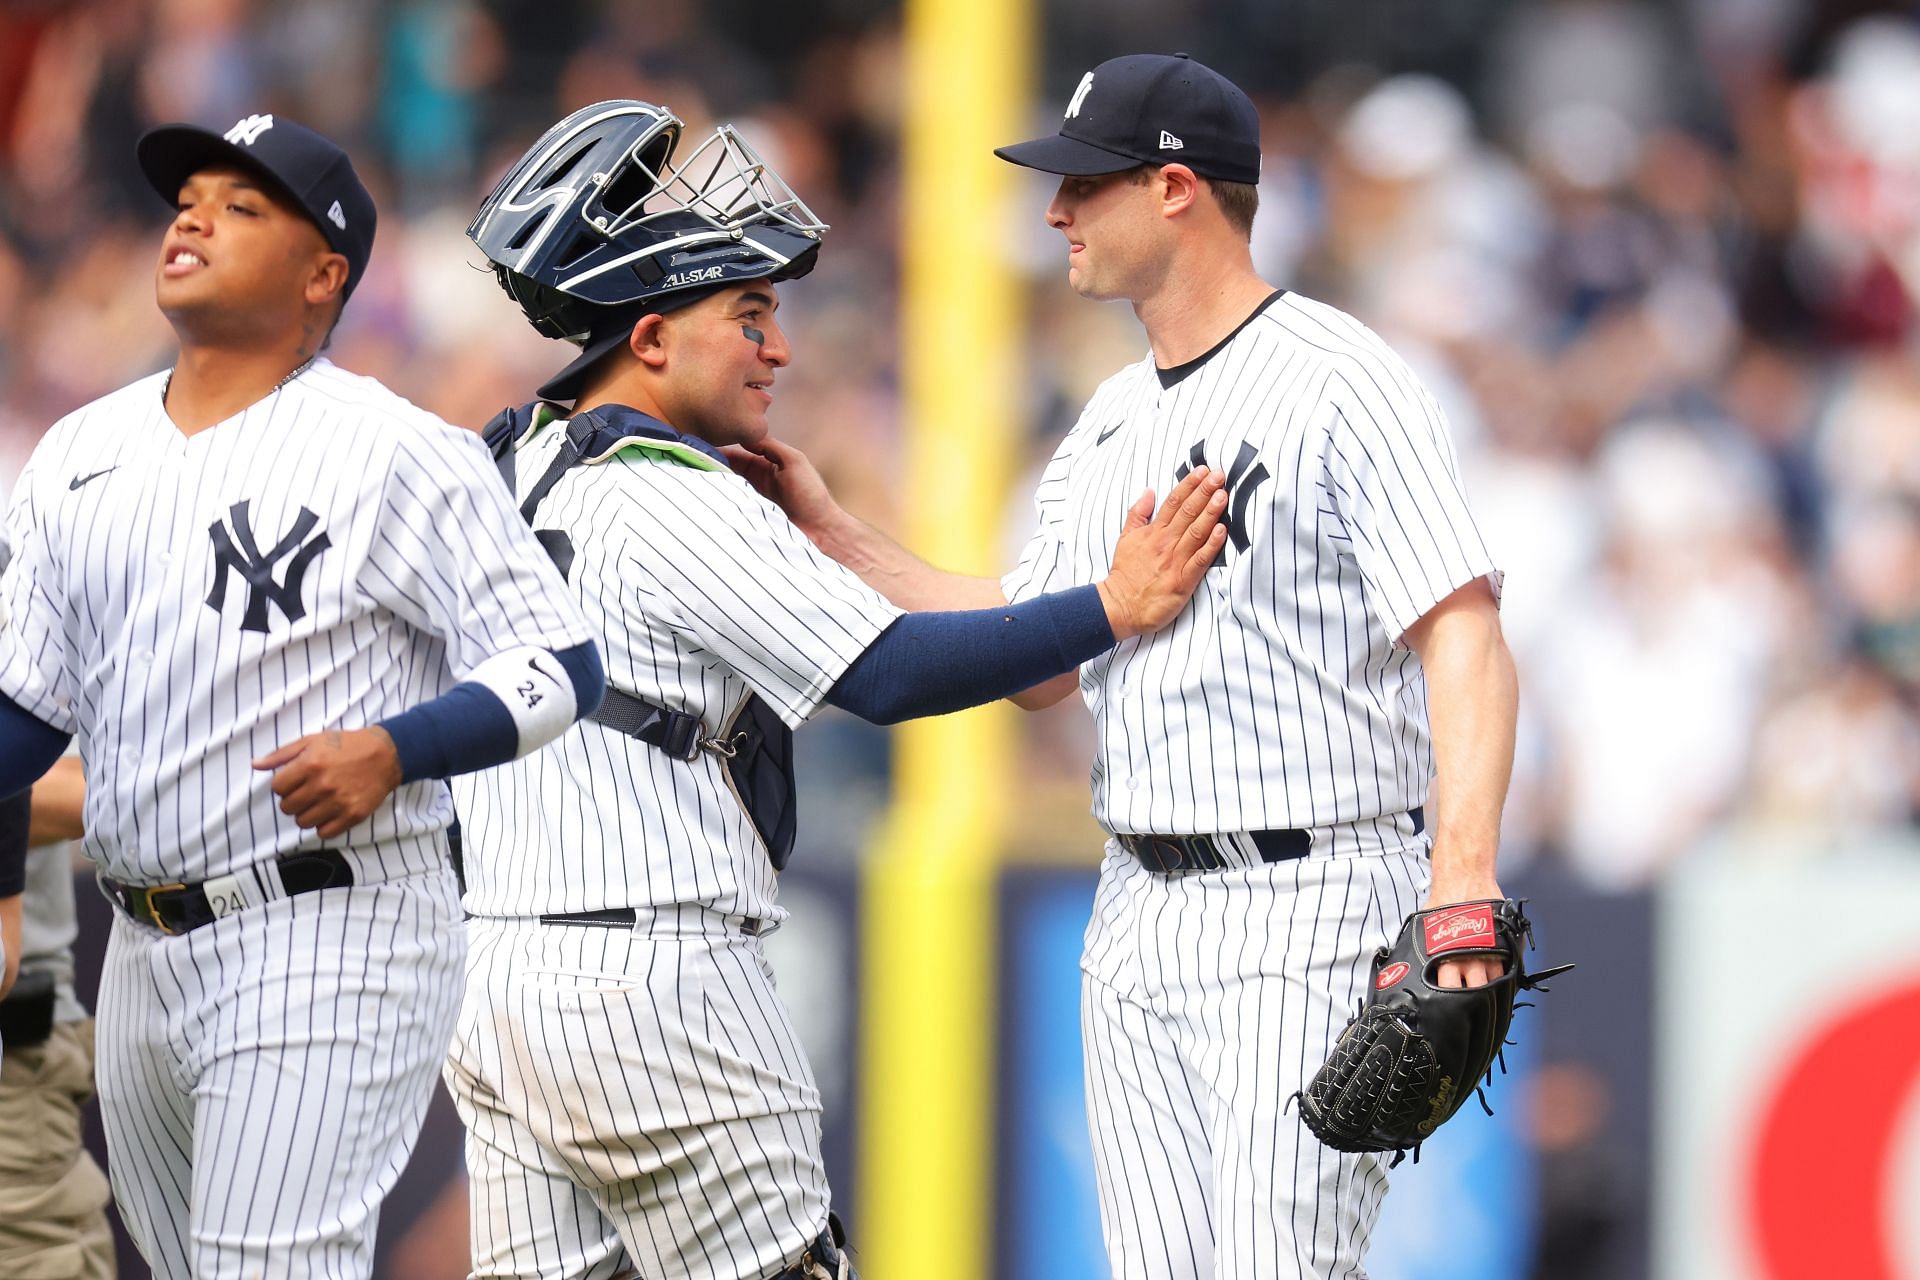 Gerrit Cole, right, of the New York Yankees celebrates with Jose Trevino after pitching a complete game shutout against the Minnesota Twins.